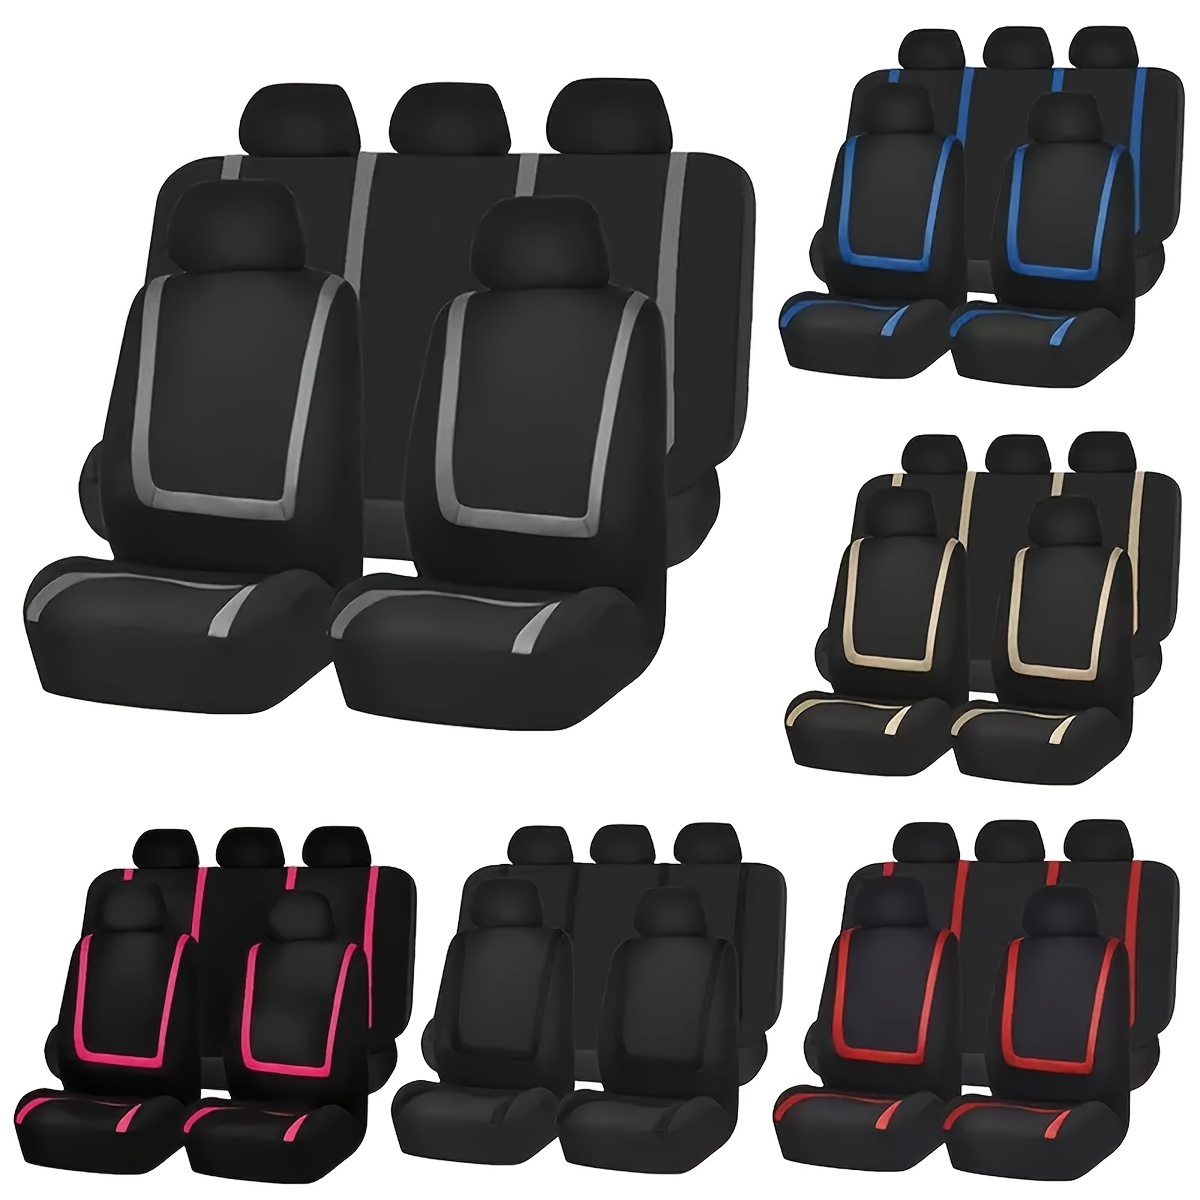 

Universal Car Seat Covers Set For 5-seats, Stripe Design, Durable Polyester Fabric, Full Protection, Easy Installation, Auto Interior Accessories